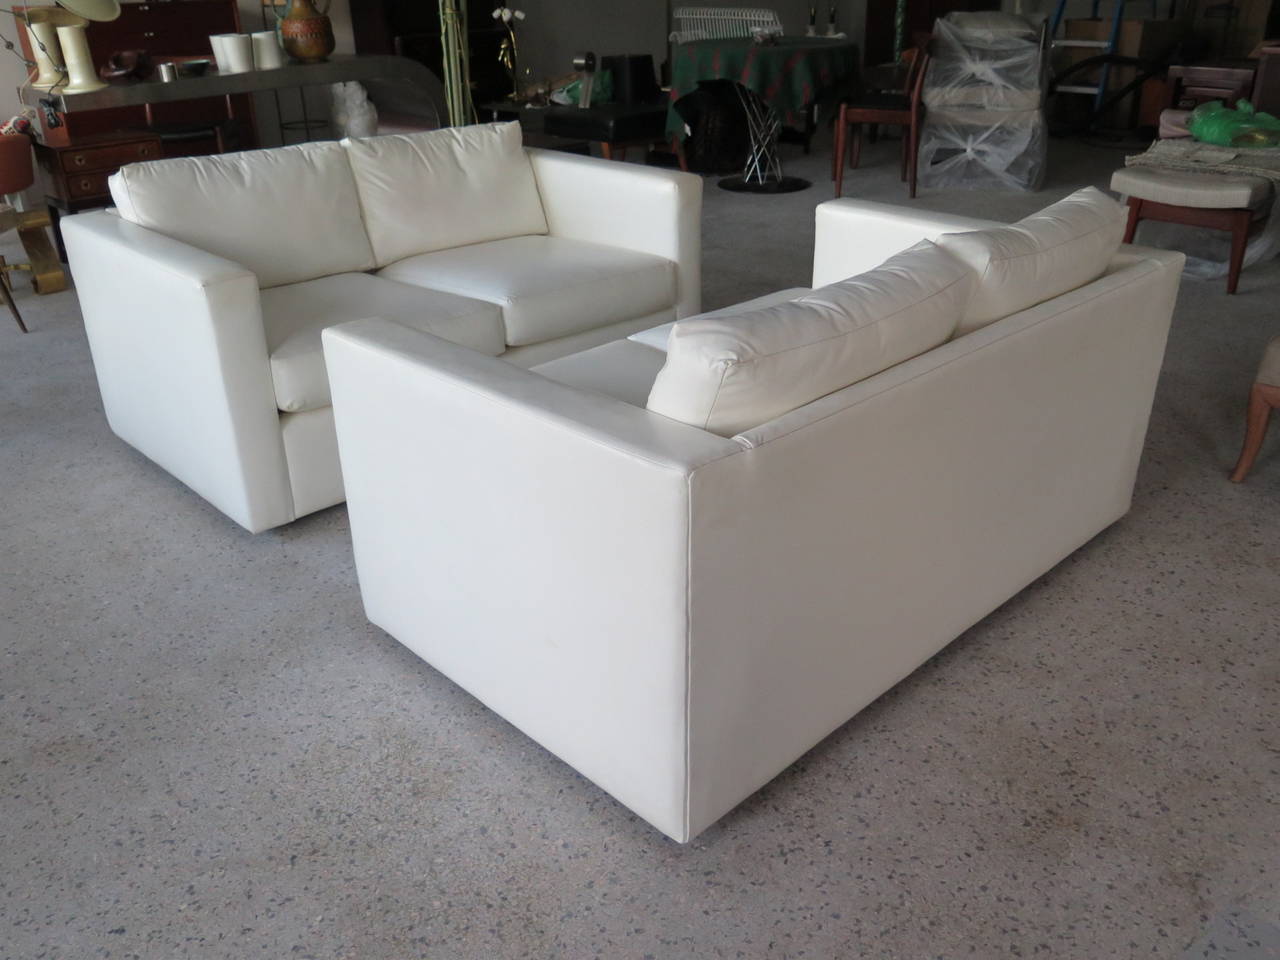 A Classic pair of signed Milo Baughman for Thayer Coggin settees, circa 1970s.
Original white vinyl upholstery, simple boxy, rectangular shapes, with small plinth legs for a slightly raised, floating effect. Loose cushions and pillows.